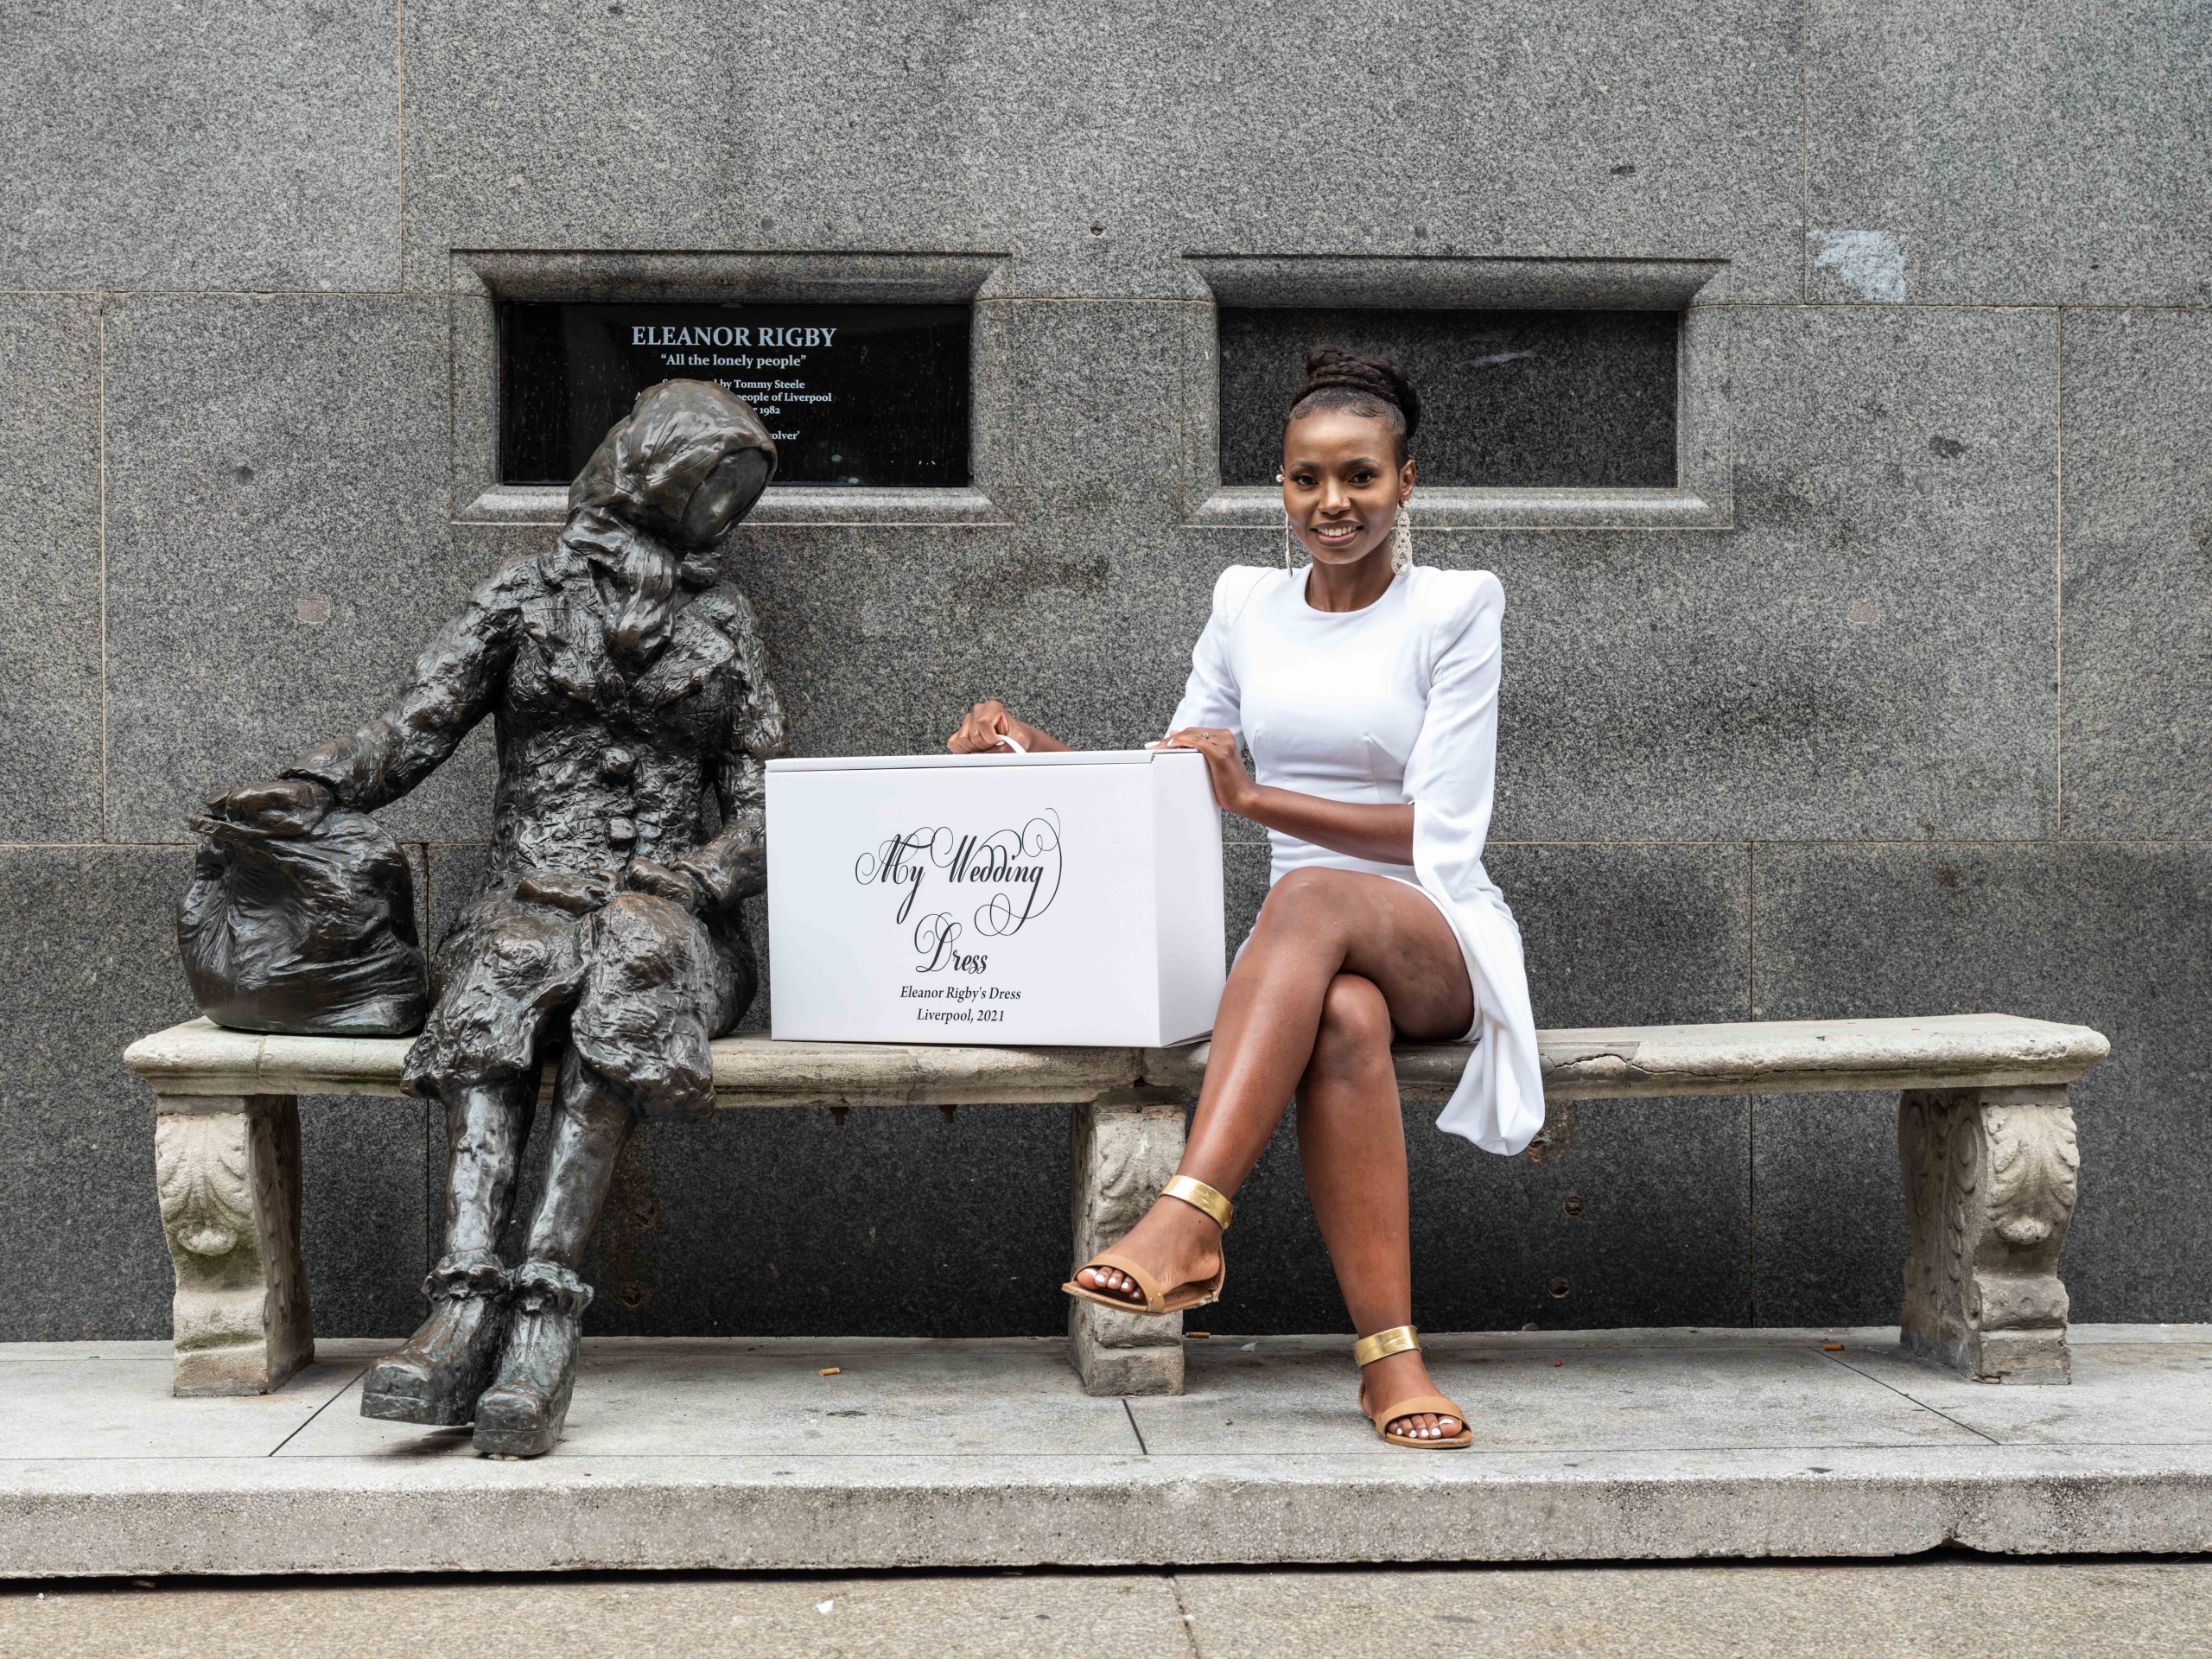 artist Taya Hughes sat next to the statue of eleanor rigby